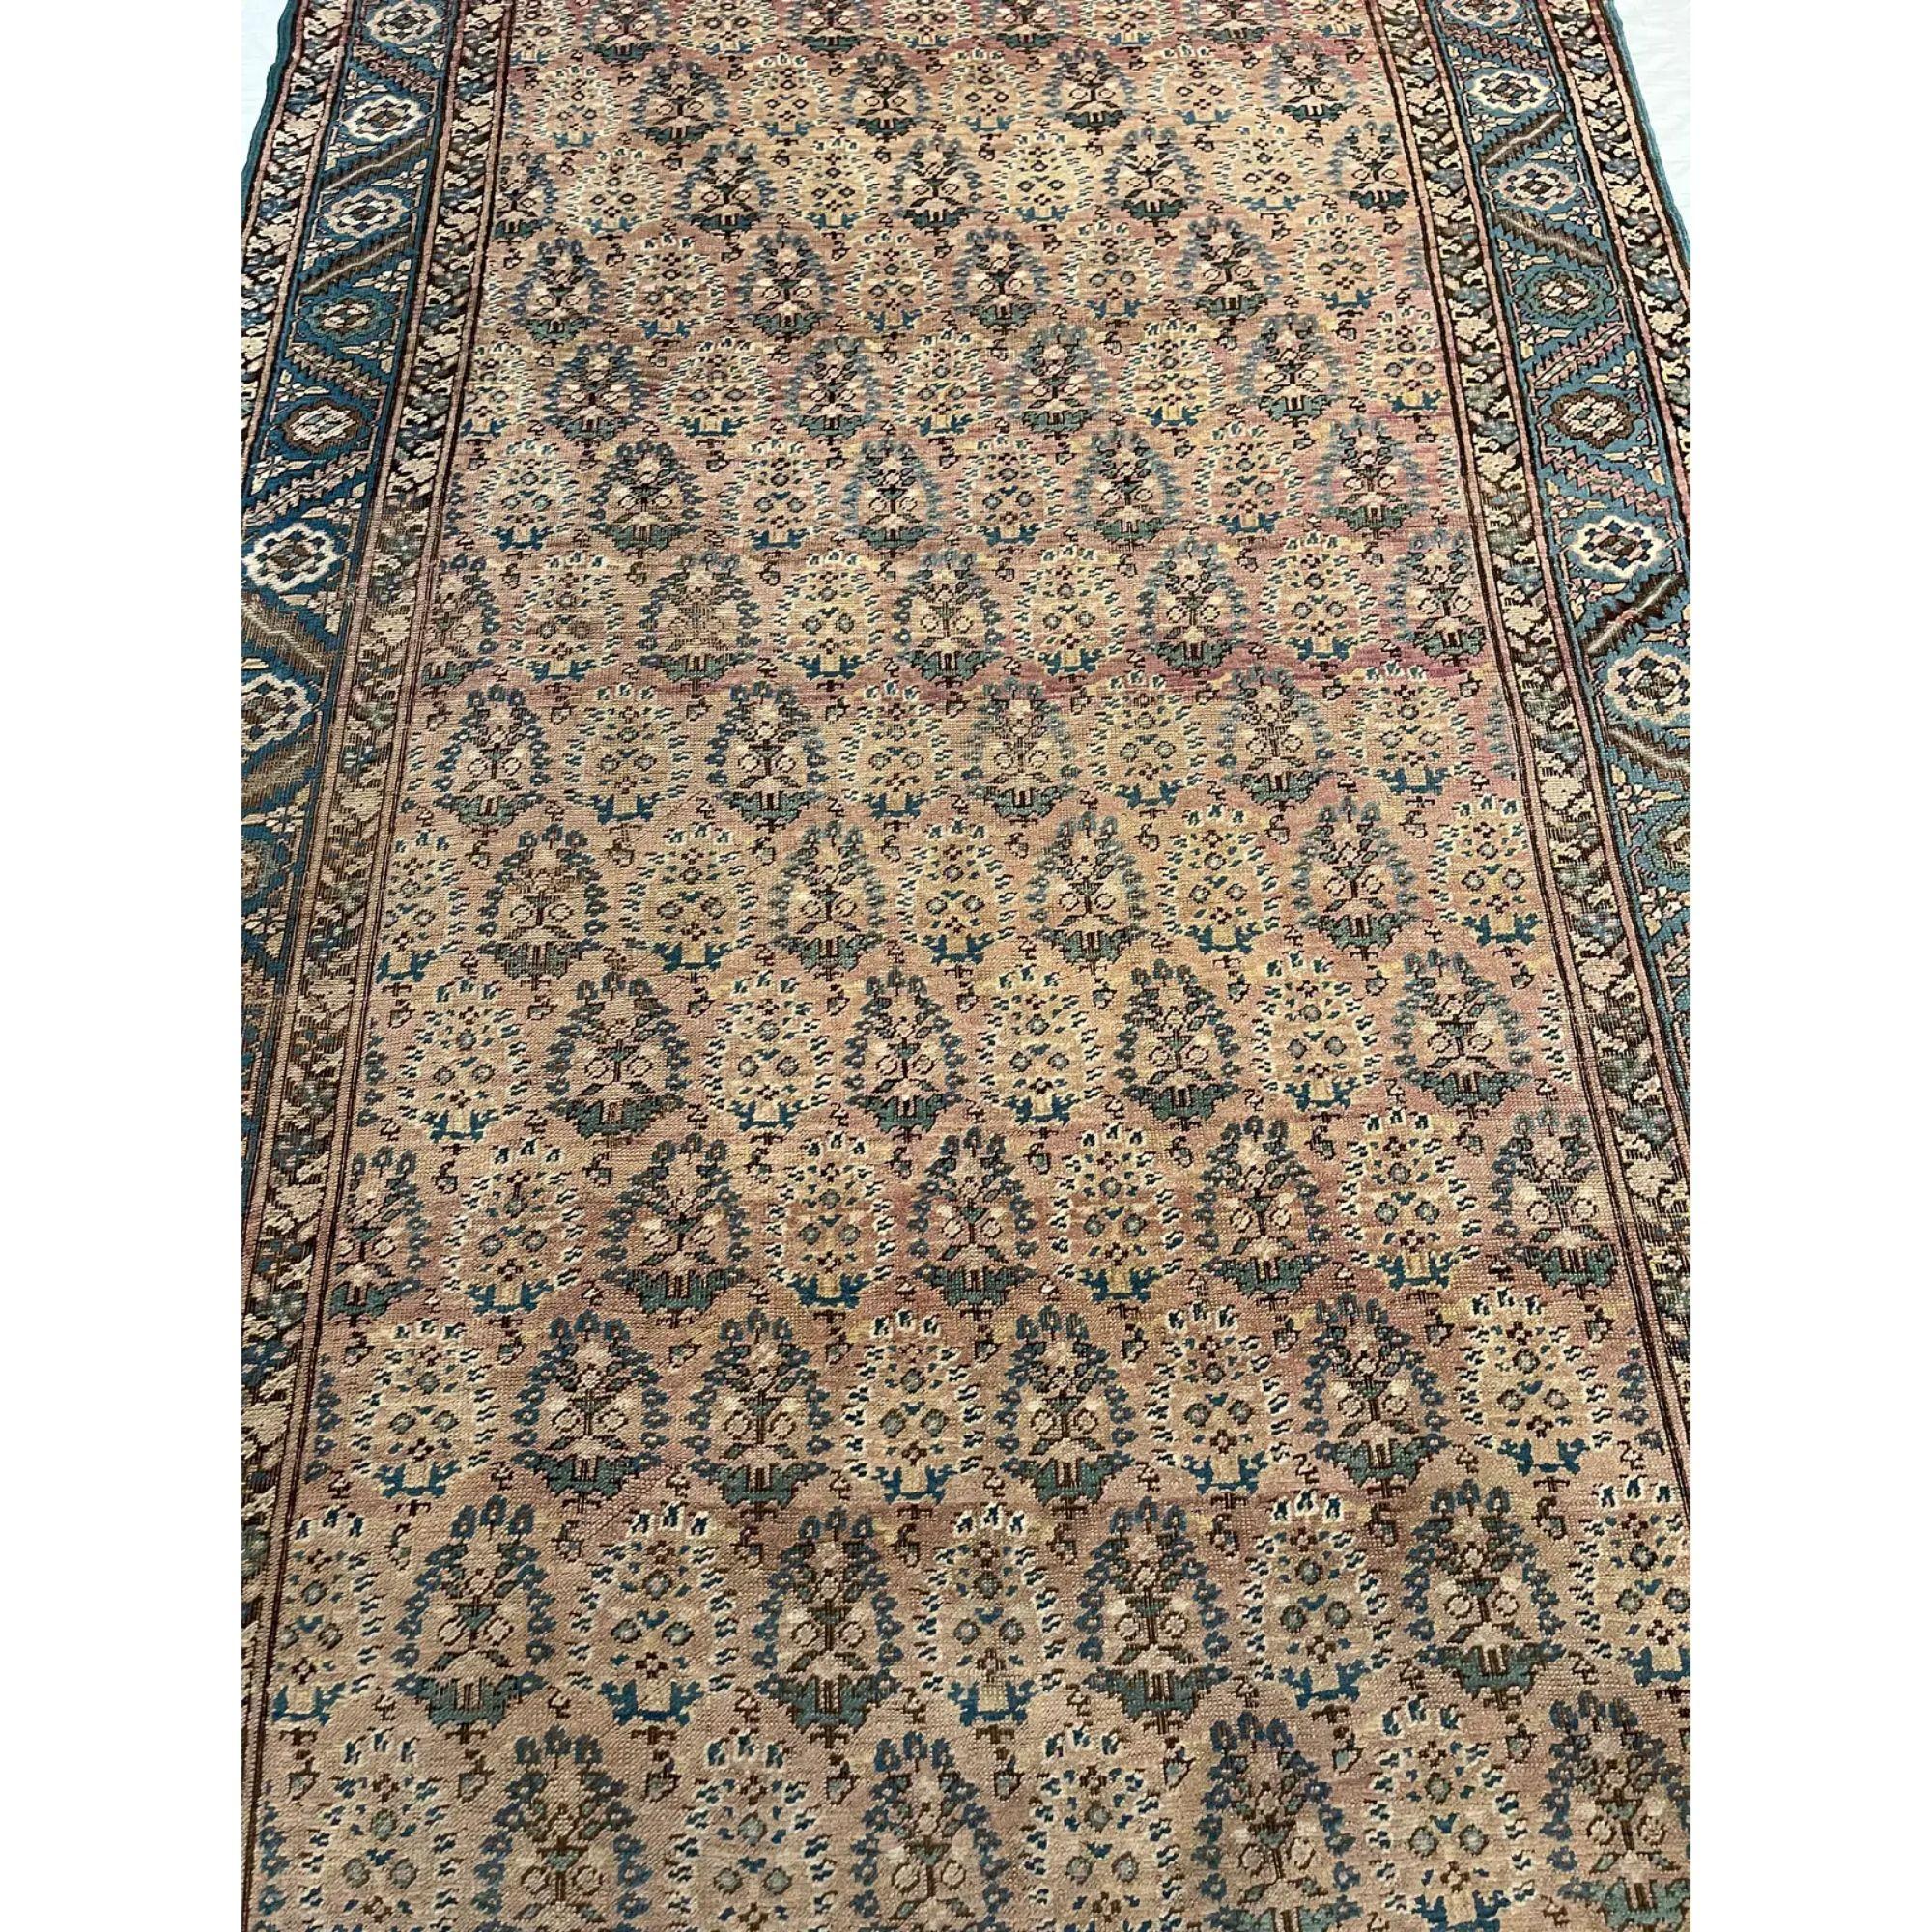 Bakshaish Rugs – Among the oversized rugs made in Persia, Bakshaish (Bakhshaish or Bakhshaysh) carpets are in a class by themselves. In essence, Bakshaish Rugs adapt the style and feeling of the finest smaller village or tribal rugs to the the scale